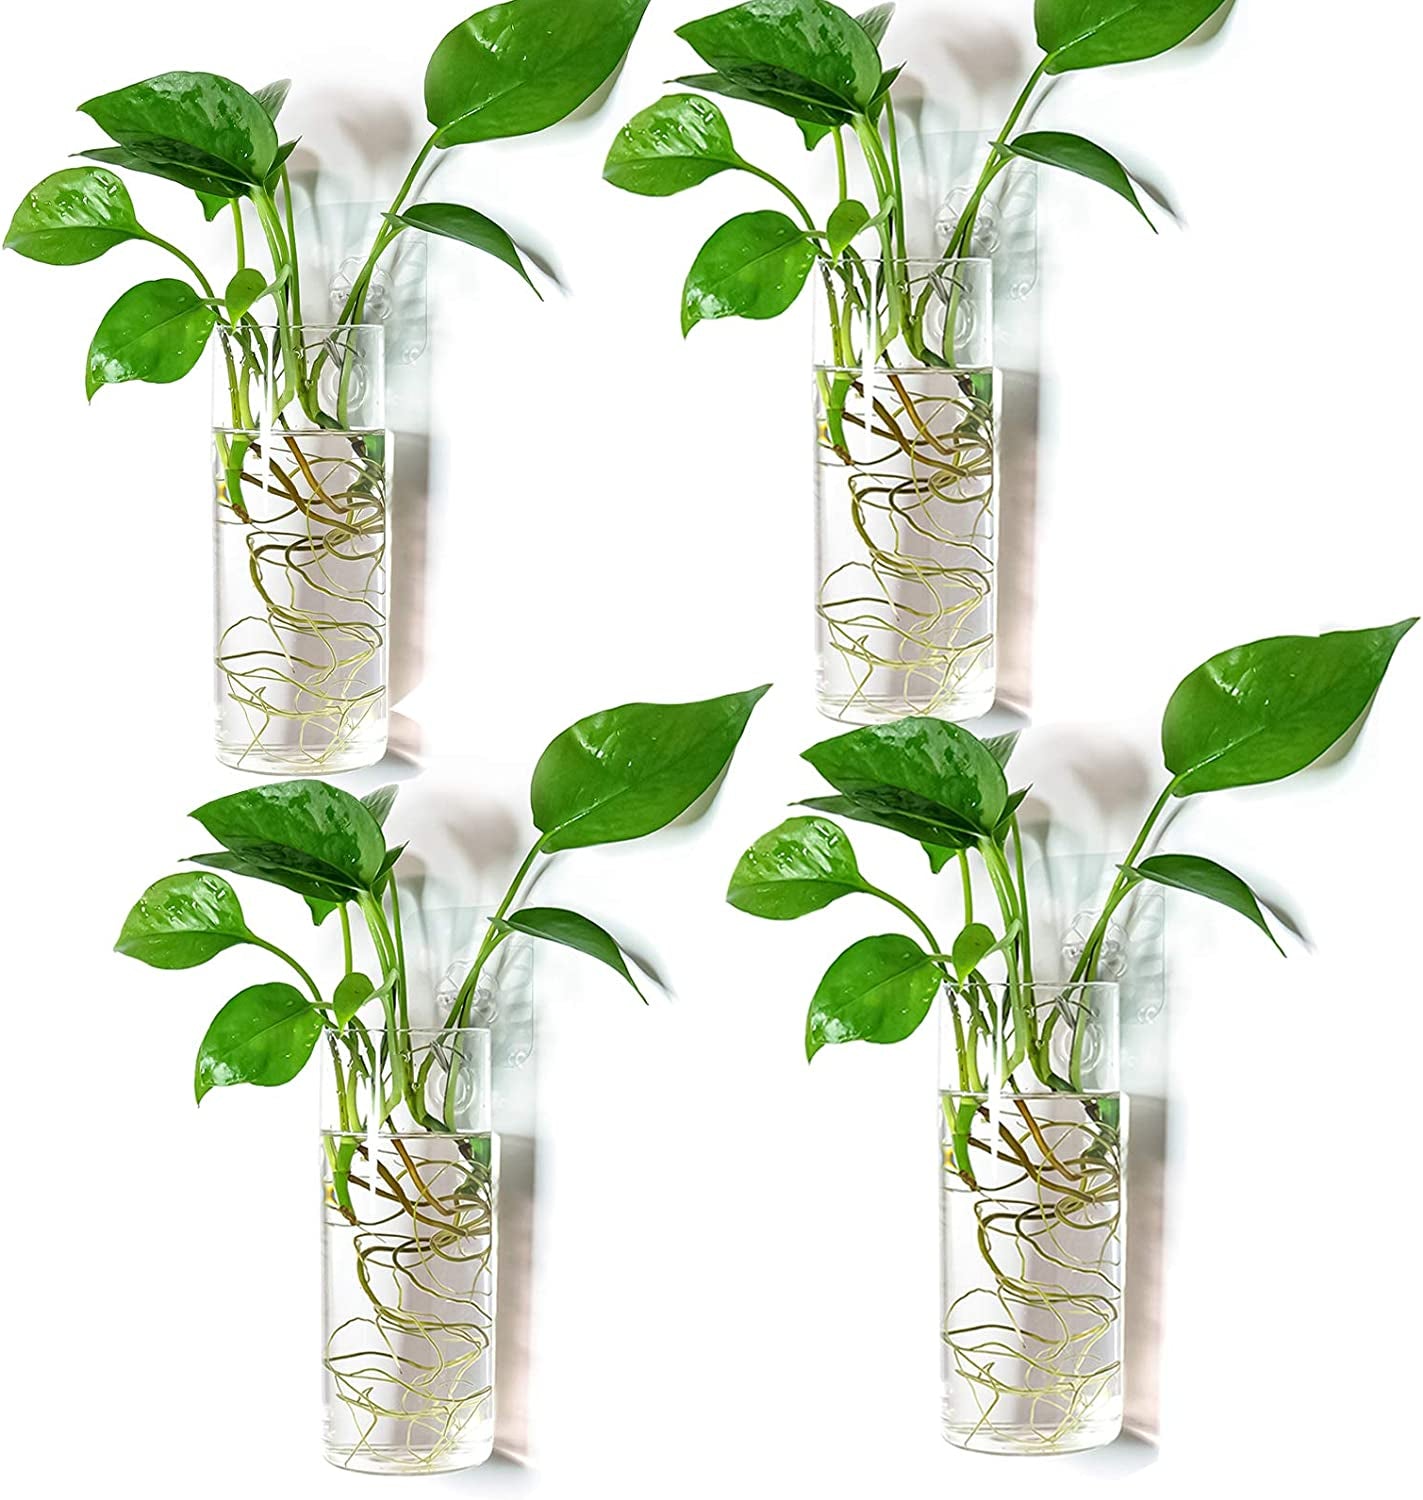 Kingbuy, Kingbuy Wall Hanging Glass Plant Terrarium Container Cylinder Shape.4Pcs Planter Air Decorations for Home Decor